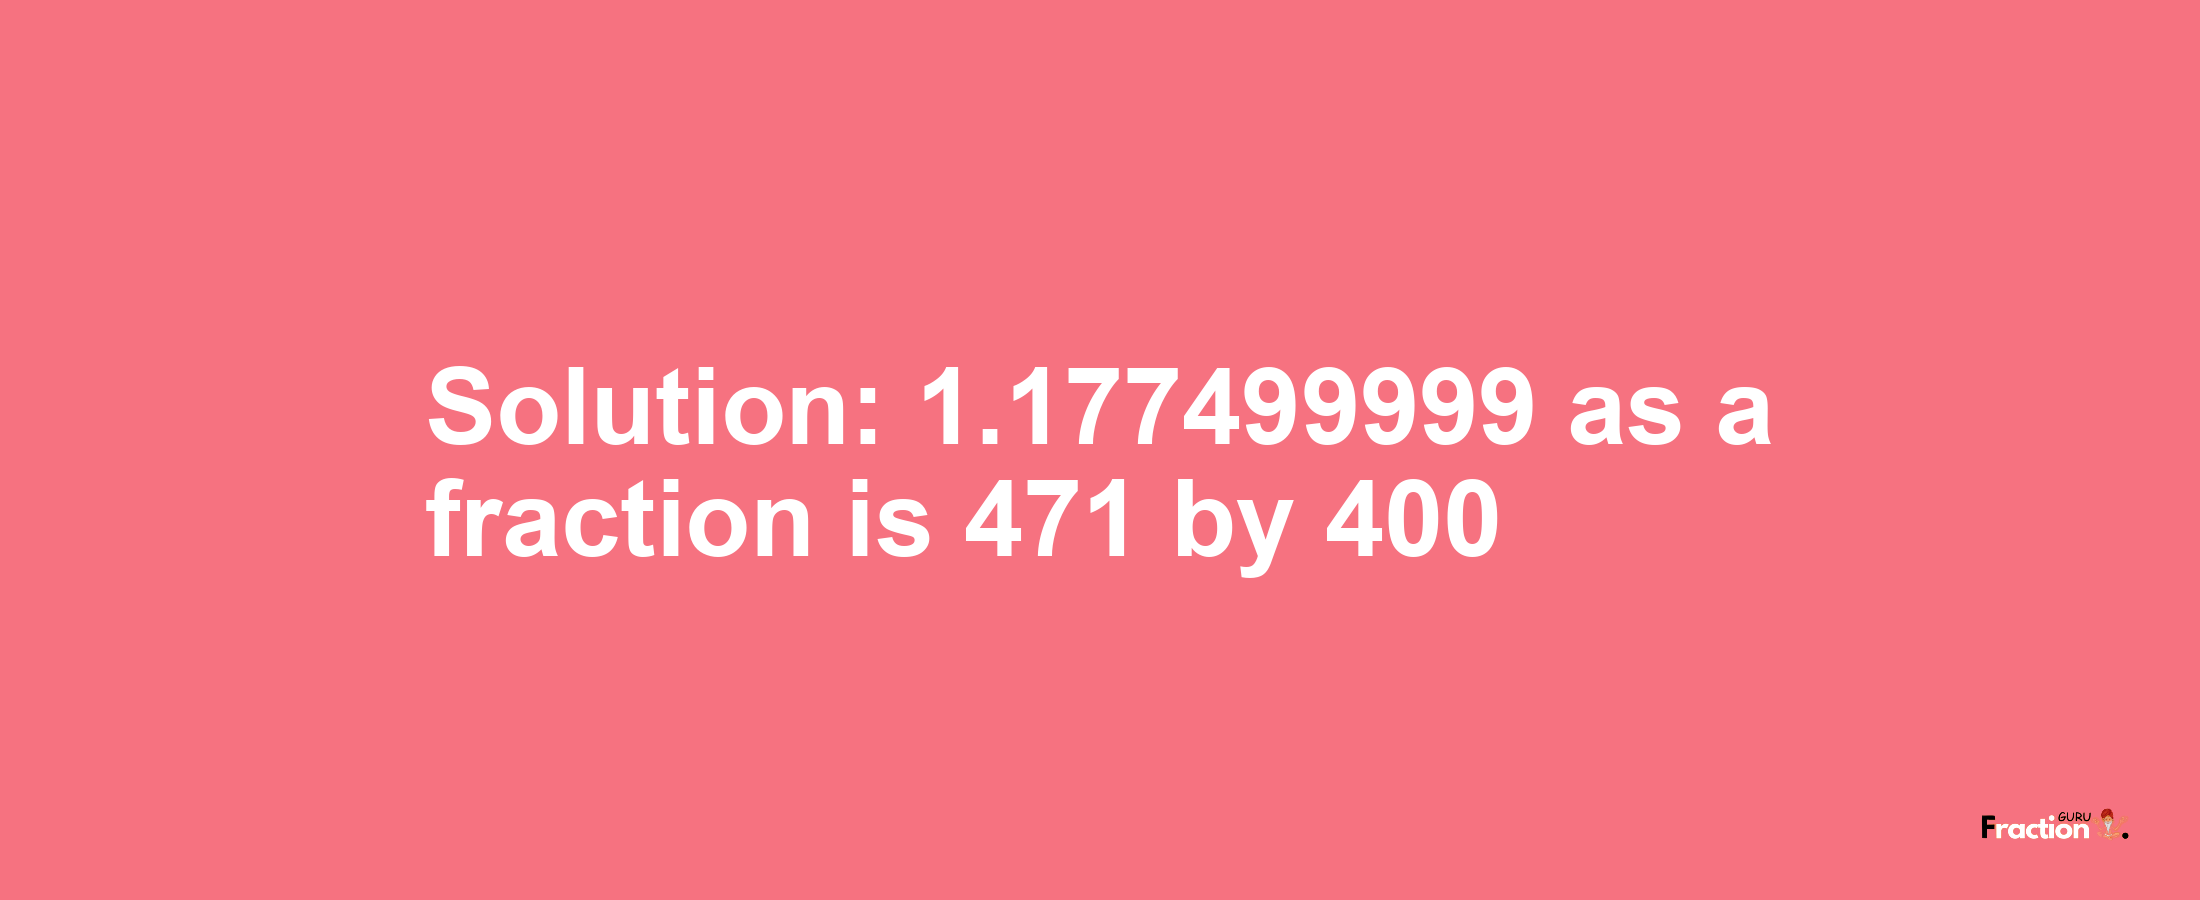 Solution:1.177499999 as a fraction is 471/400